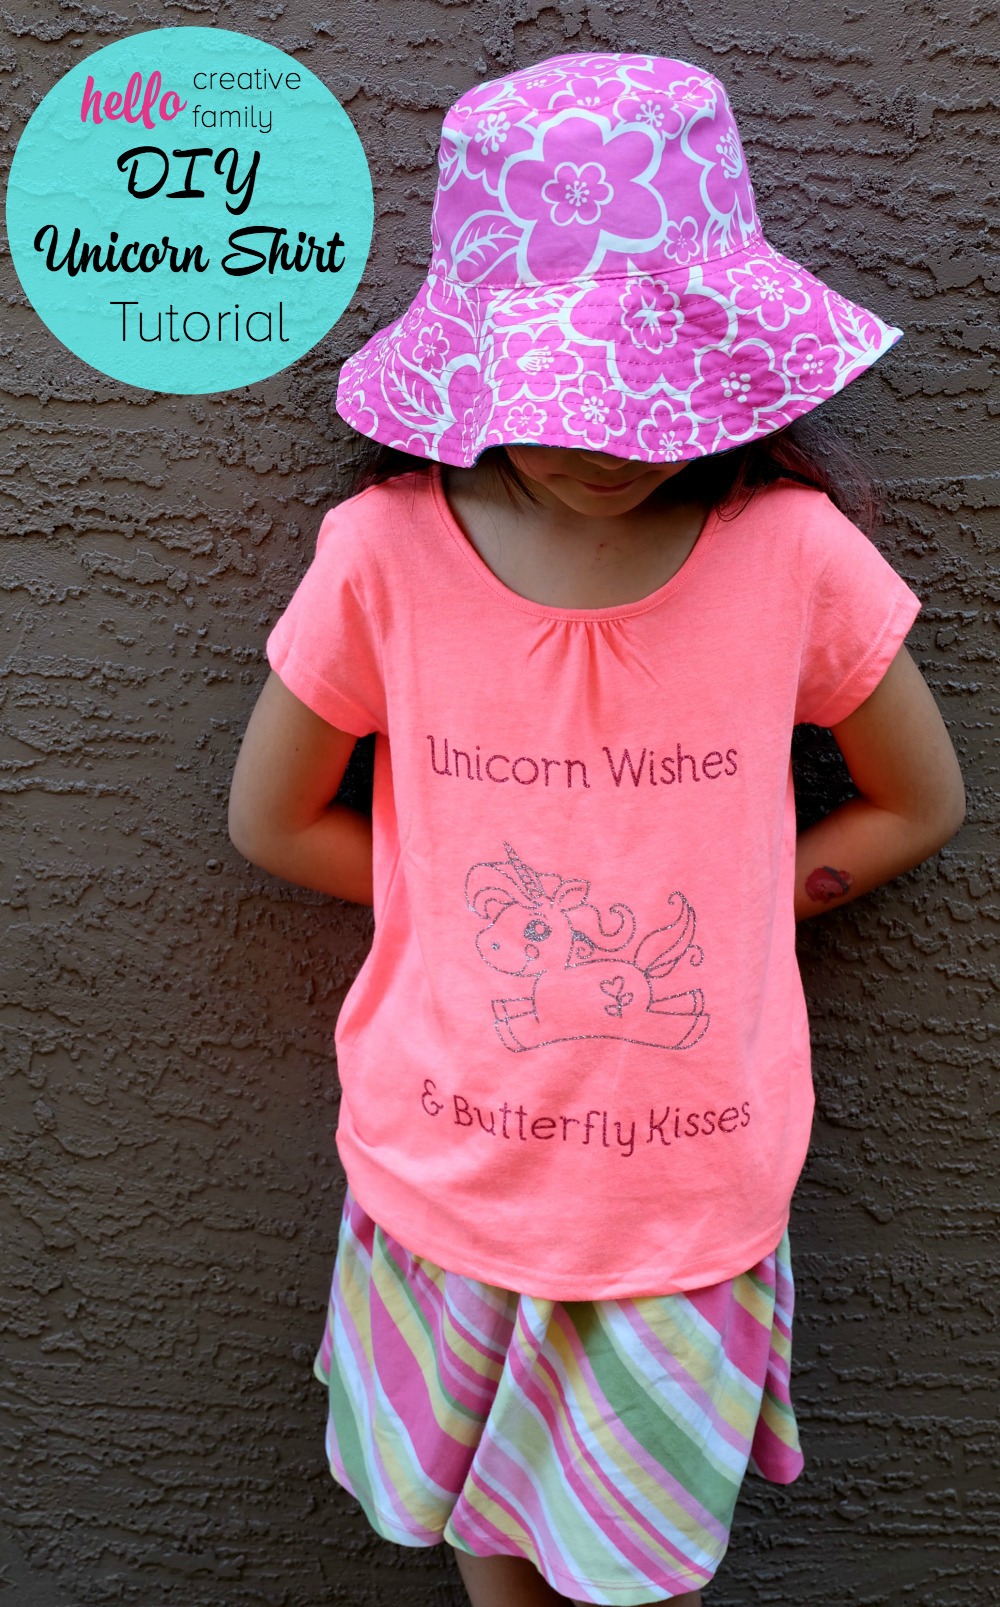 Such an adorable shirt idea! "Unicorn Wishes and Butterfly Kisses!" Kids feel extra special when they wear handmade clothing made with love. Learn how to make a DIY Unicorn Shirt with your Cricut Explore. Such a great Cricut project to make cute kids clothing! This would be great for a unicorn themed birthday party!